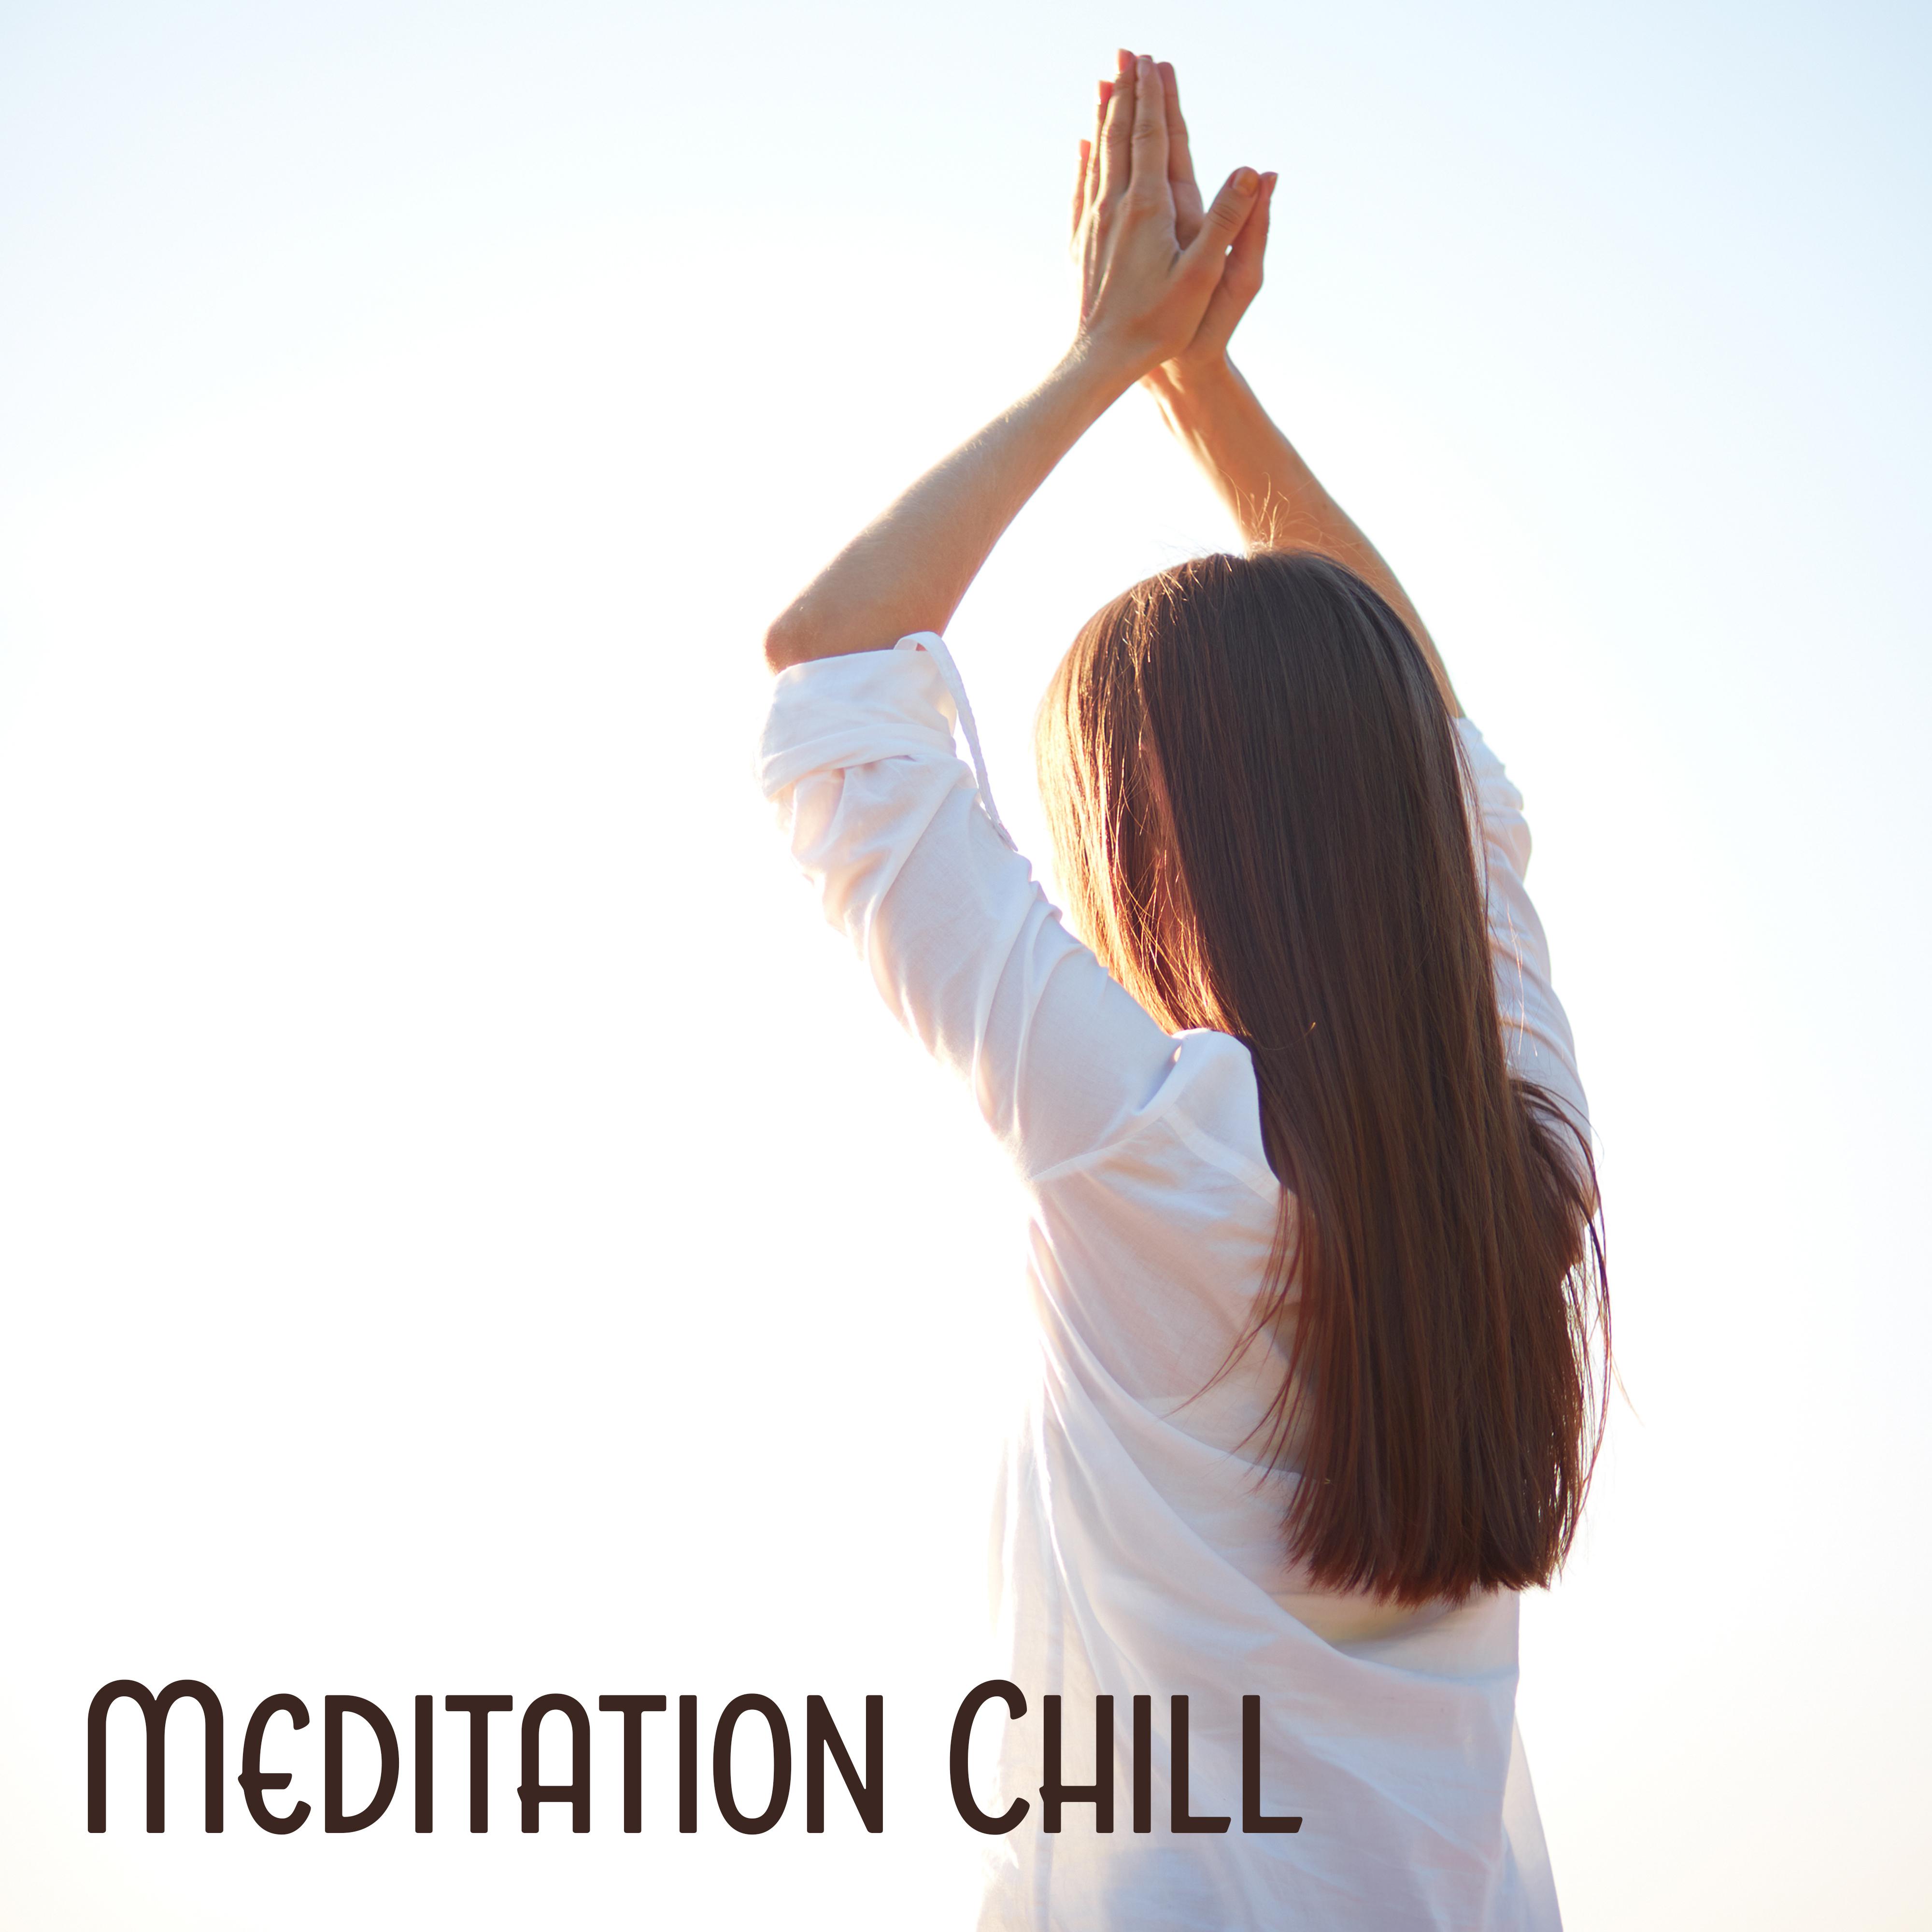 Meditation Chill – Relaxing Music, Sounds of Nature, Deep Meditation, Mantra, Zen, Yoga for Beginners